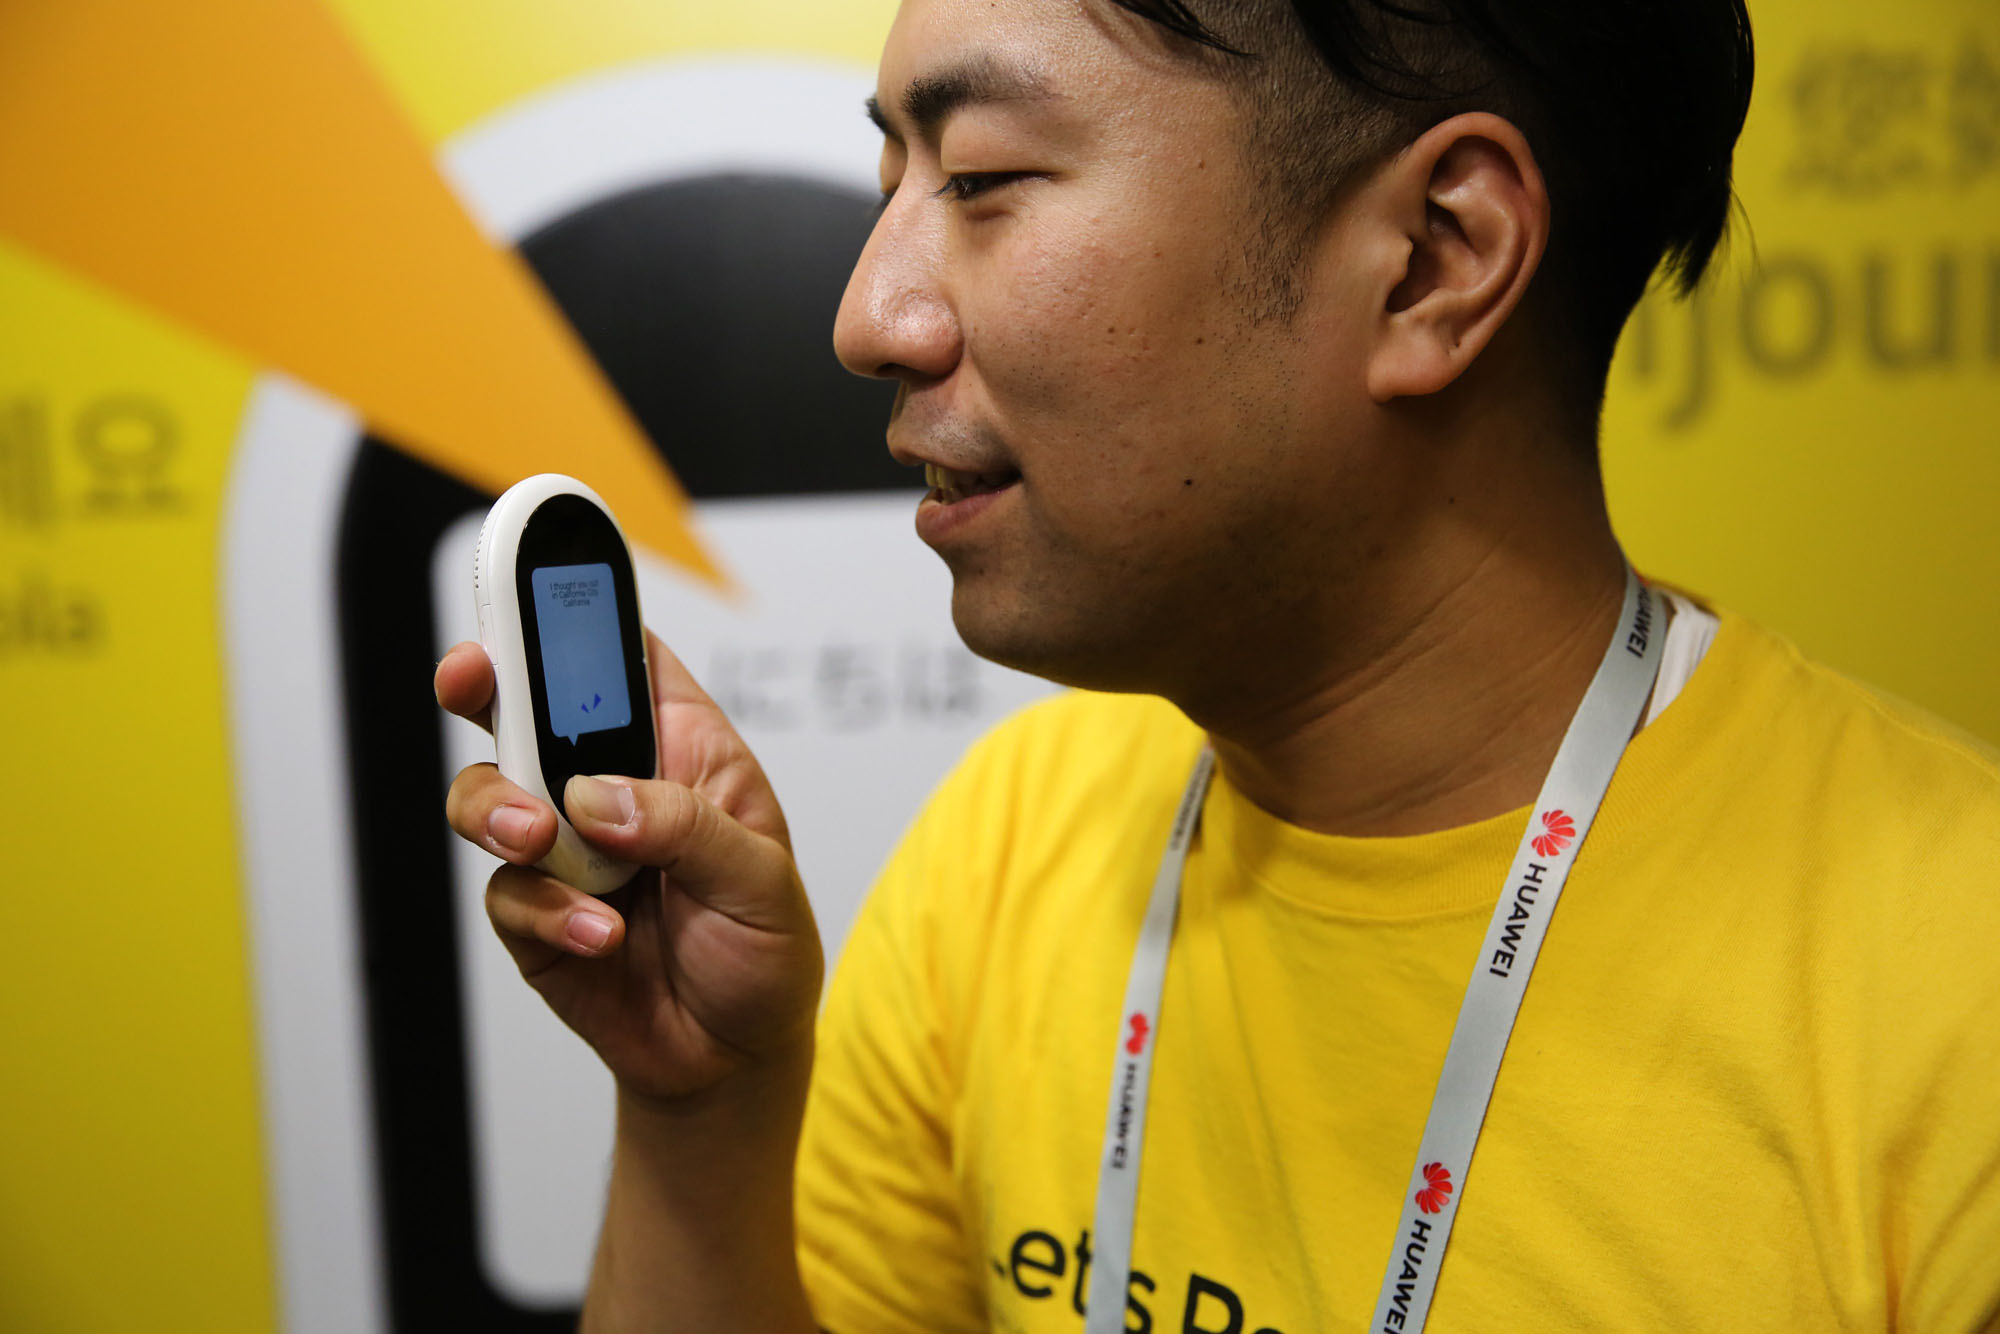 A Pocketalk mobile language translation unit is demonstrated at the Sourcenext Corp. stand during a trade fair in Barcelona, Spain, in February. | BLOOMBERG